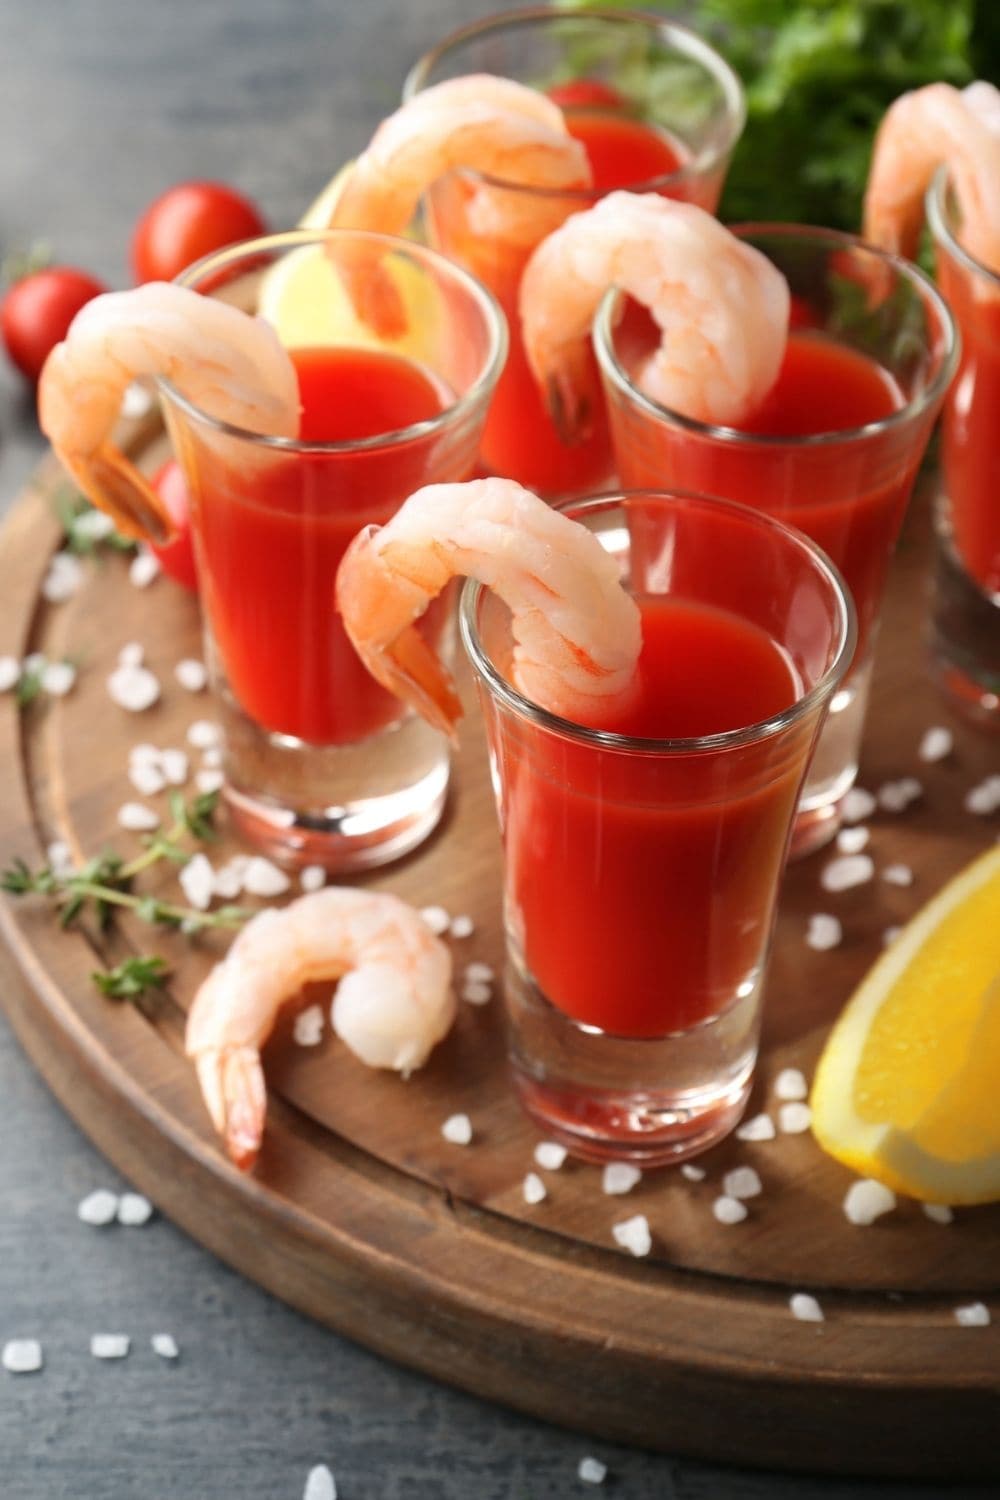 Prawn Cocktails with Tomato Sauce and Lemons